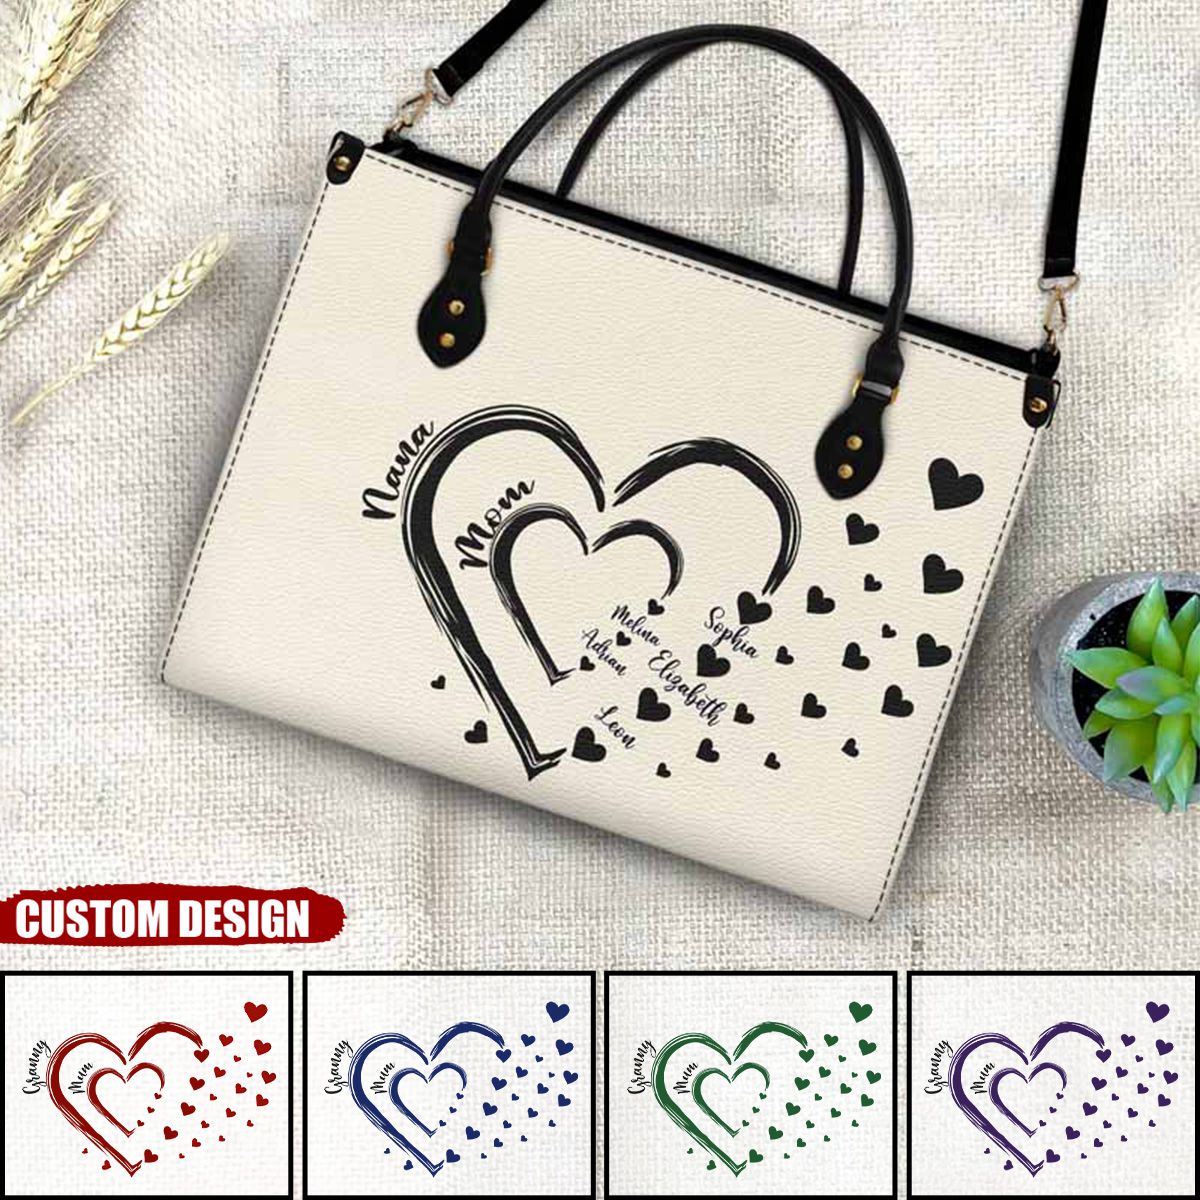 Mom's Grandma's Sweethearts - Gift For Mother, Grandmother - Personalized Leather Bag